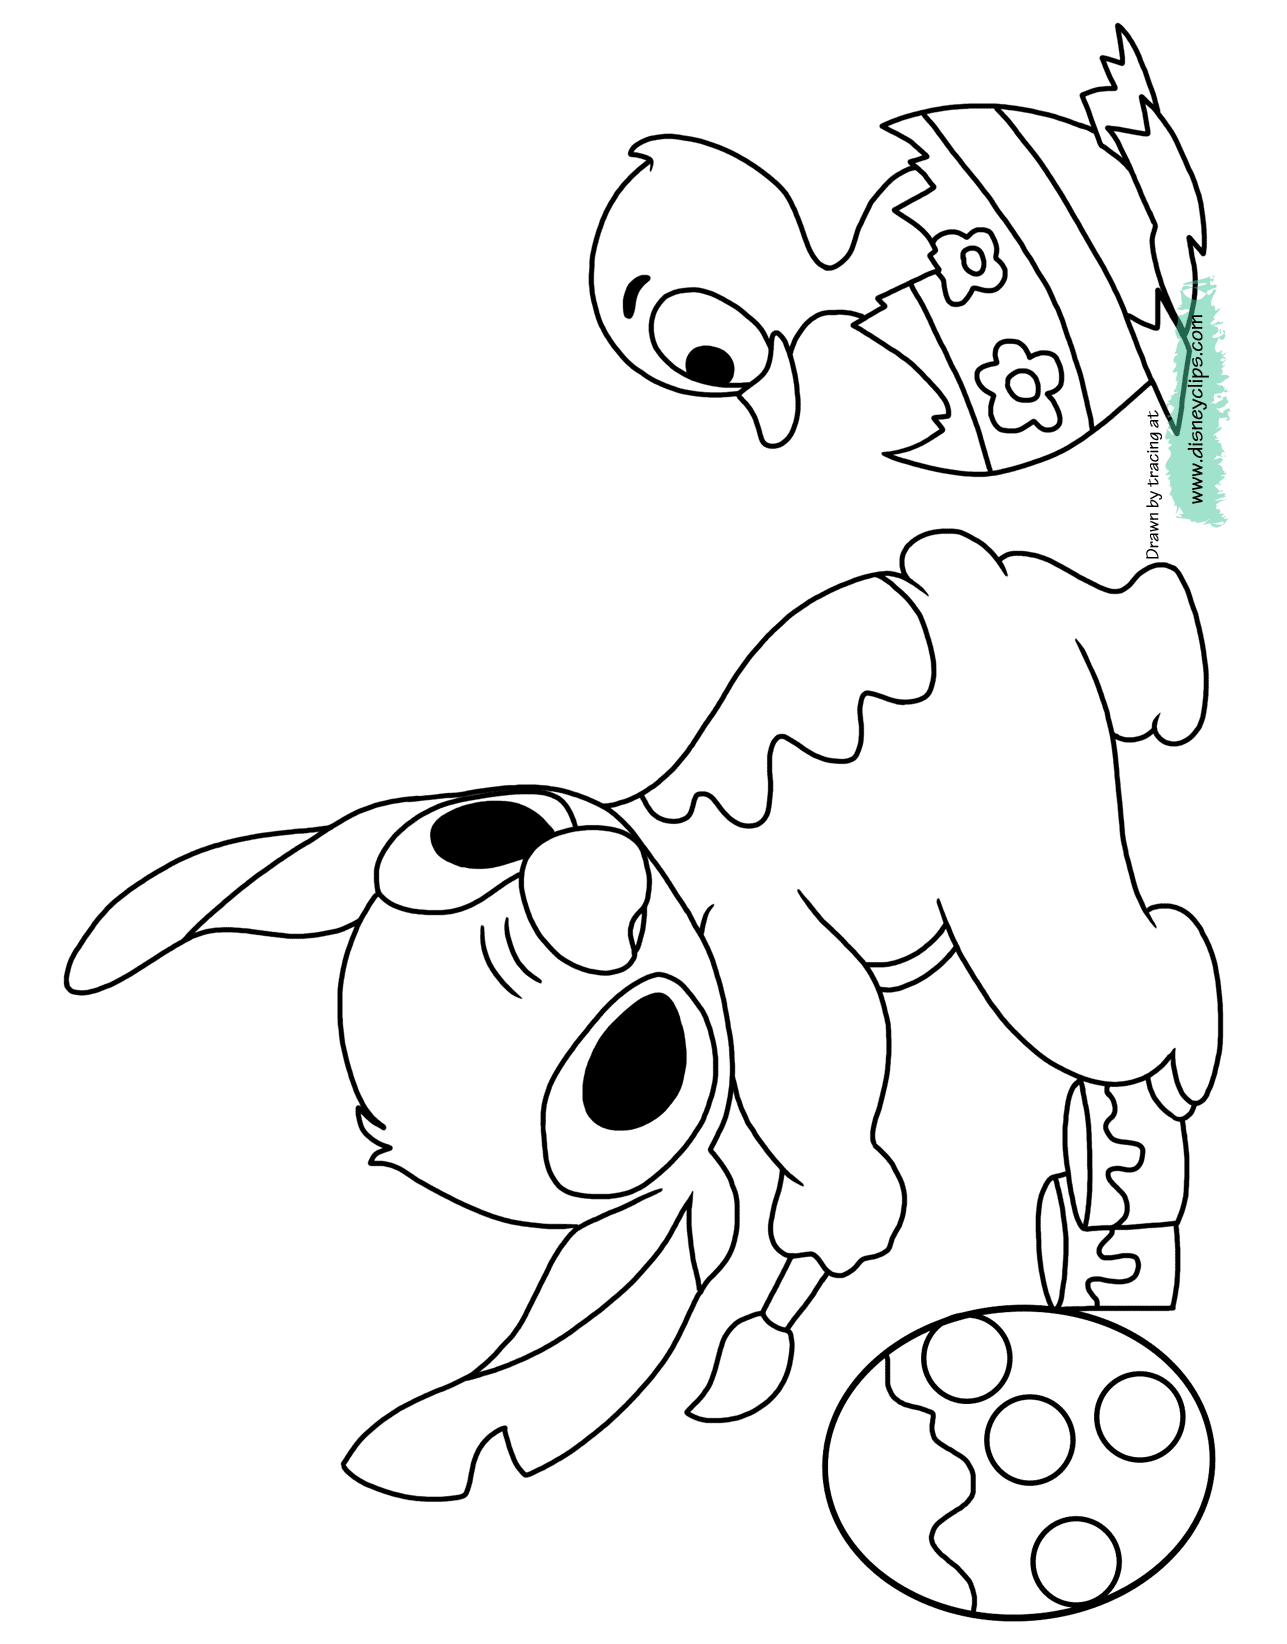 Download Disney Easter Coloring Pages 4 | Disney's World of Wonders